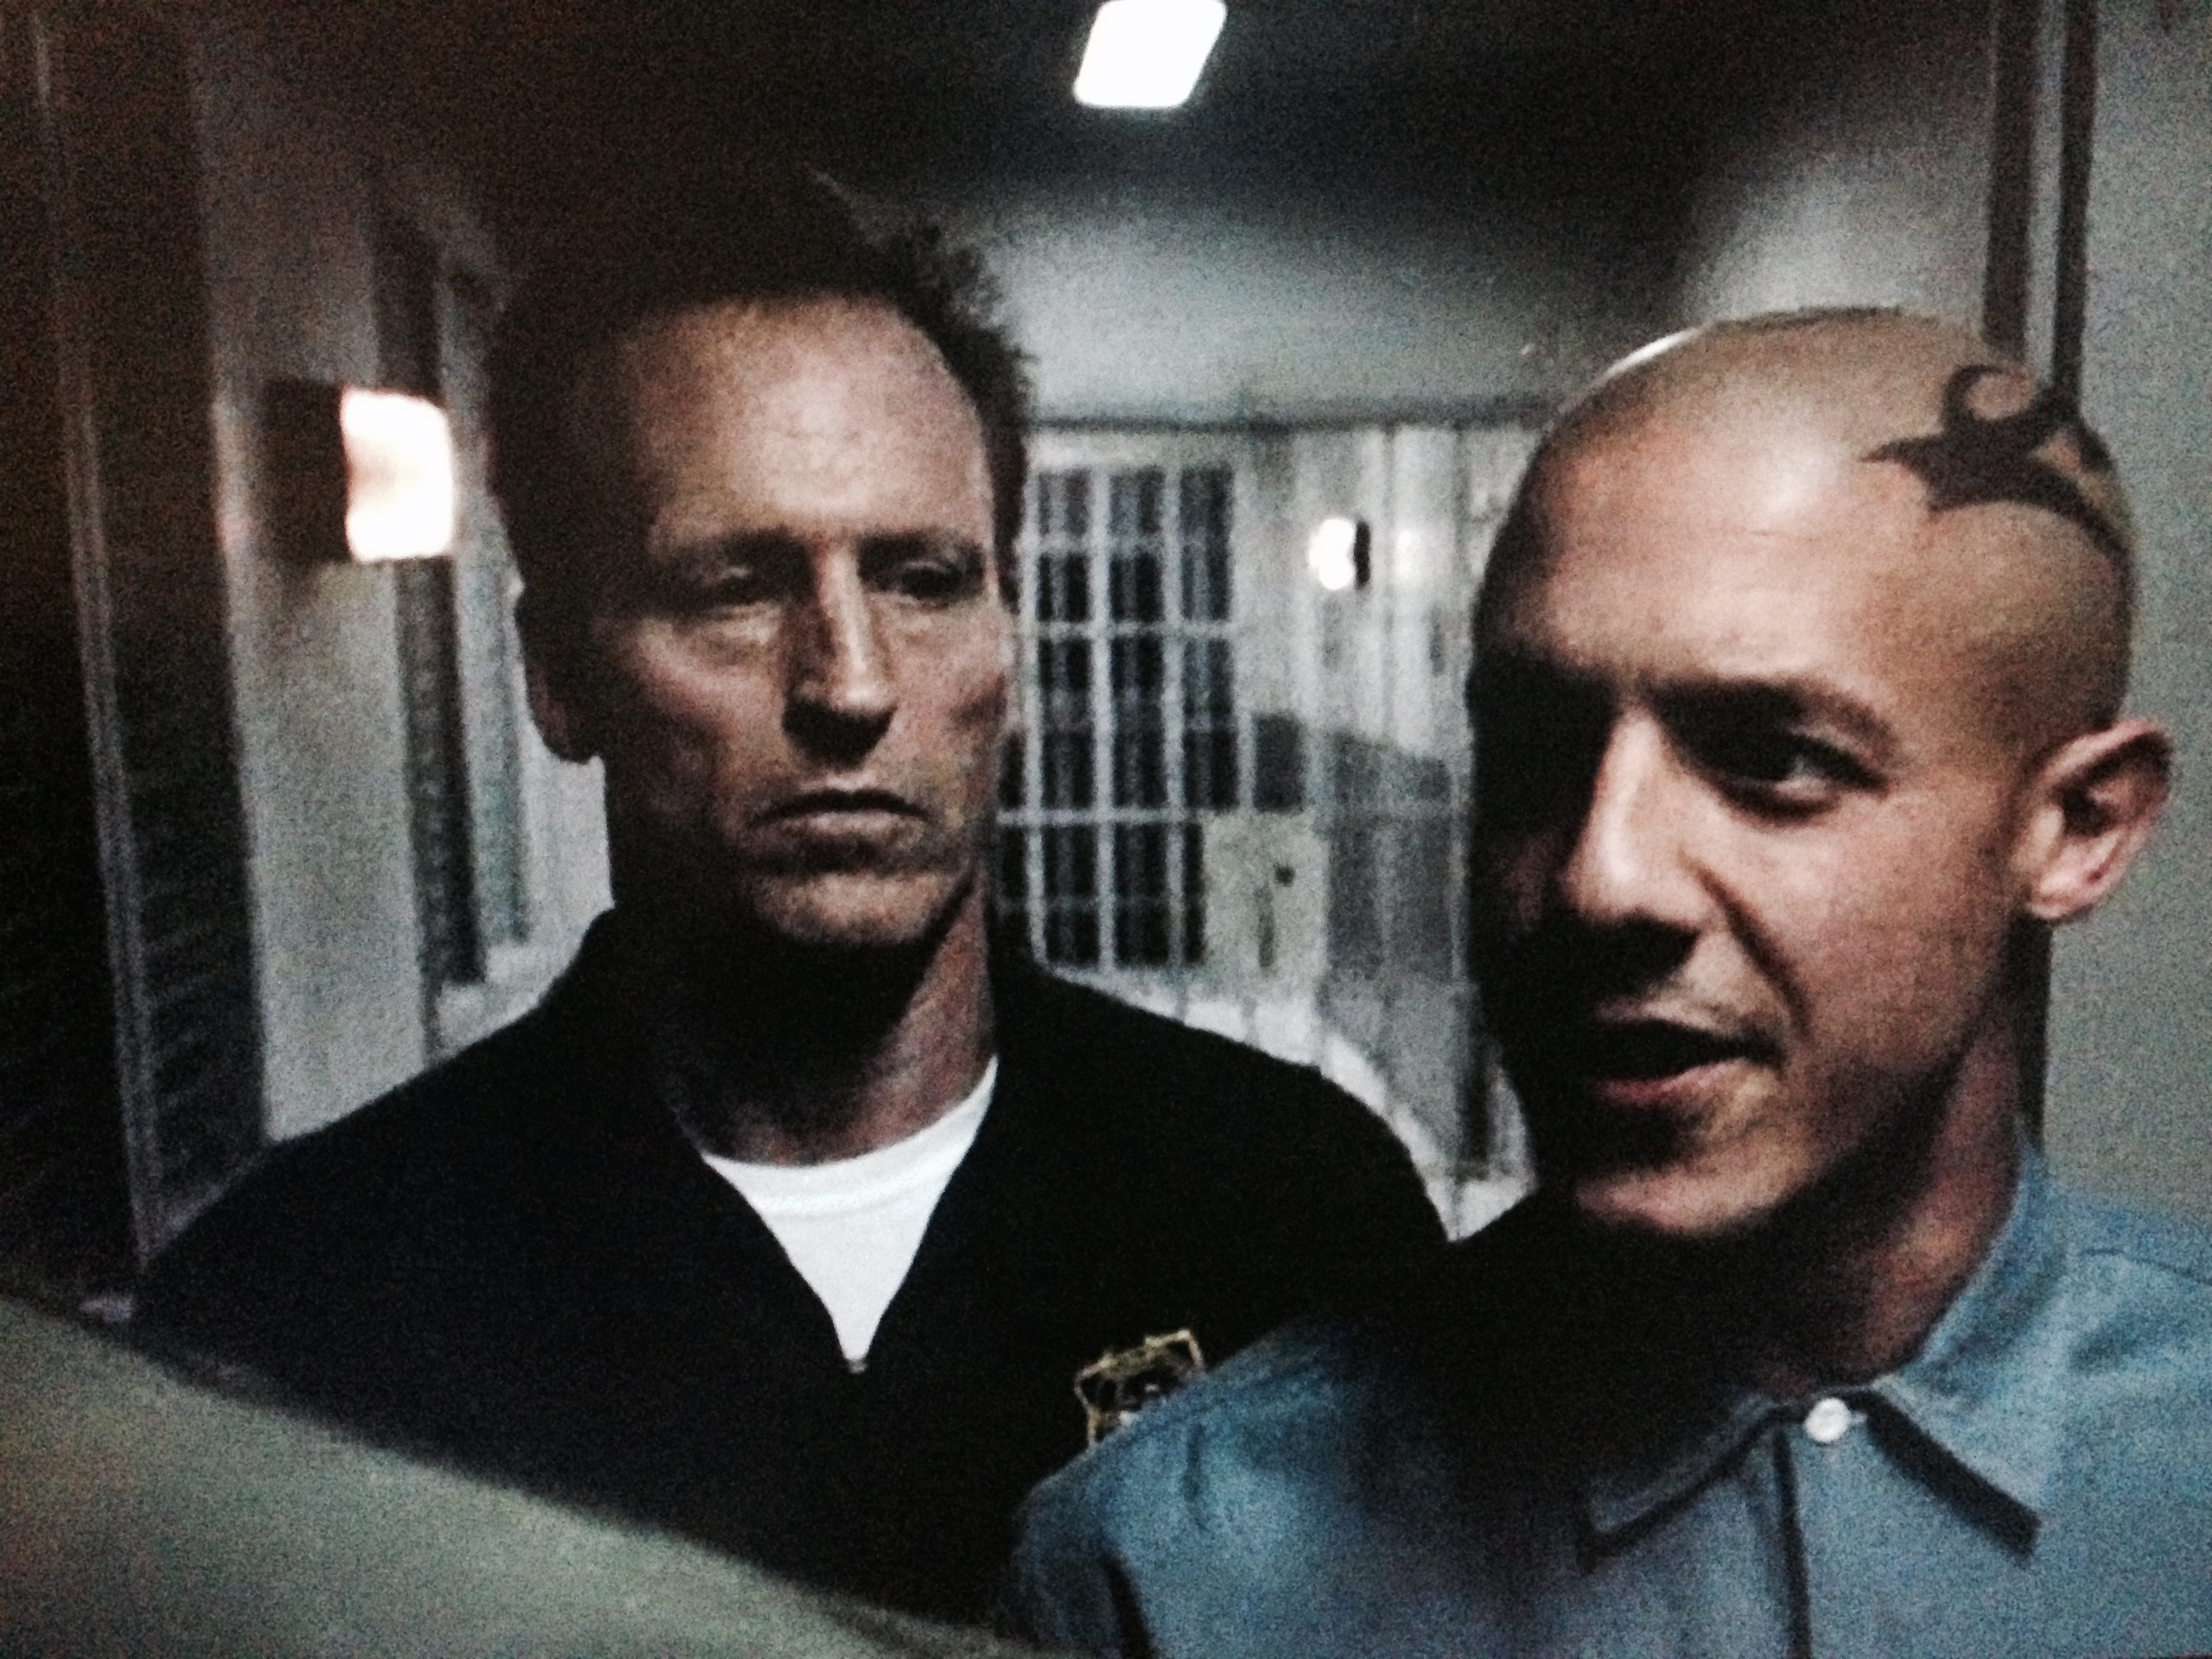 Sons of Anarchy with Theo Rossi (Juice)